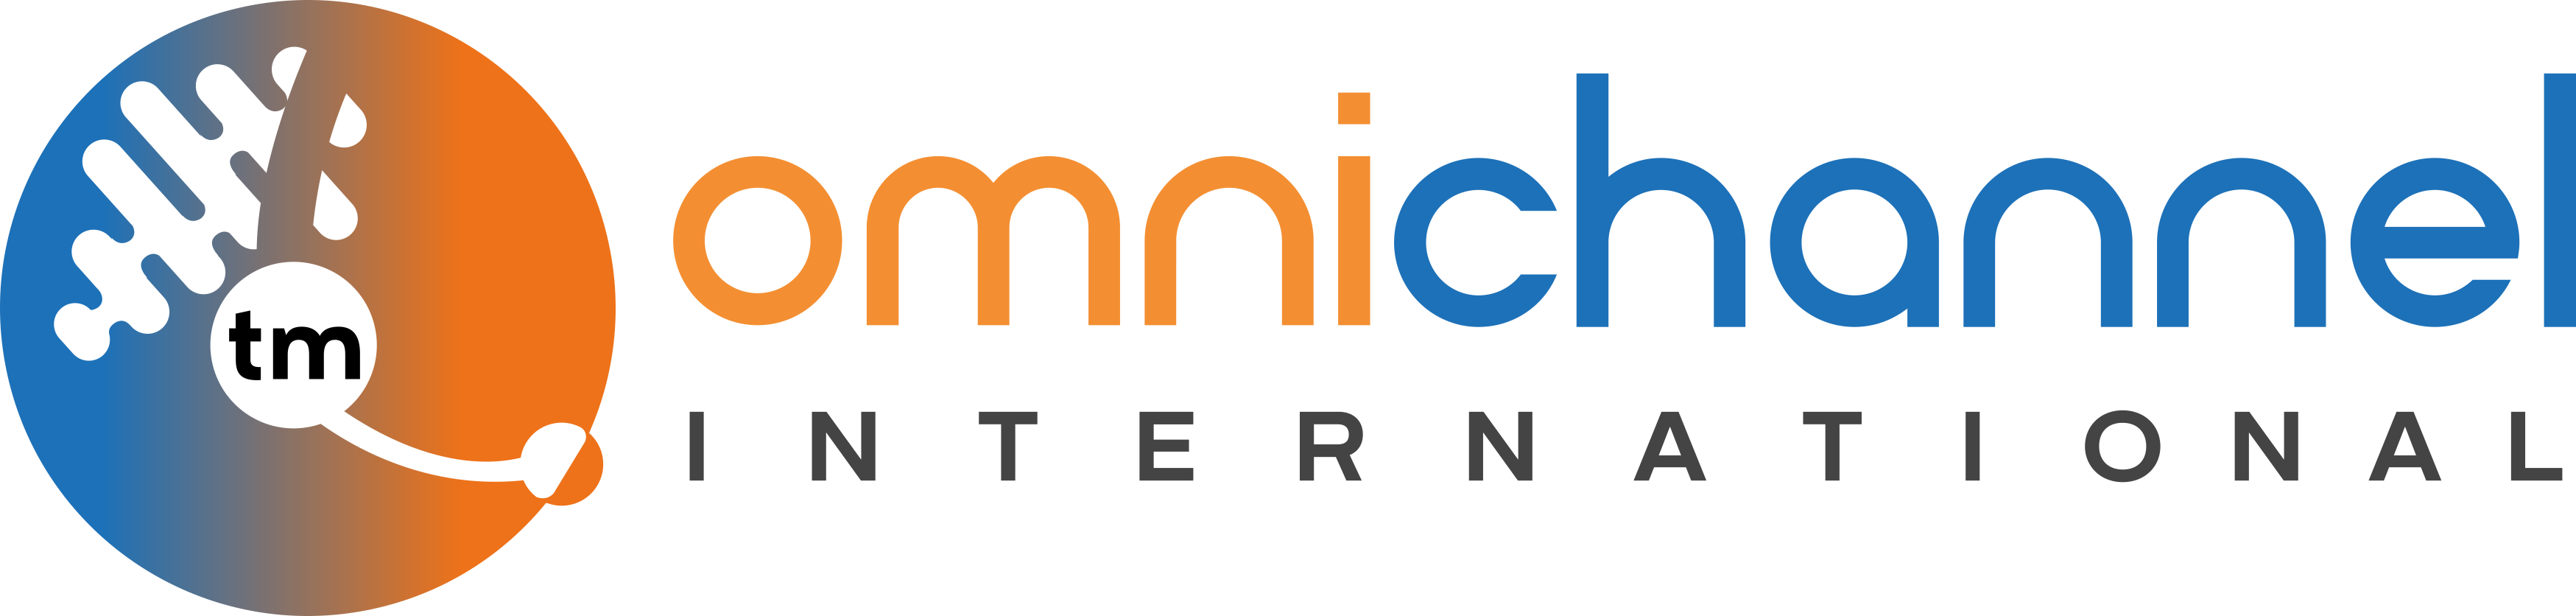 Omnichannel International - The Contact Center Professionals